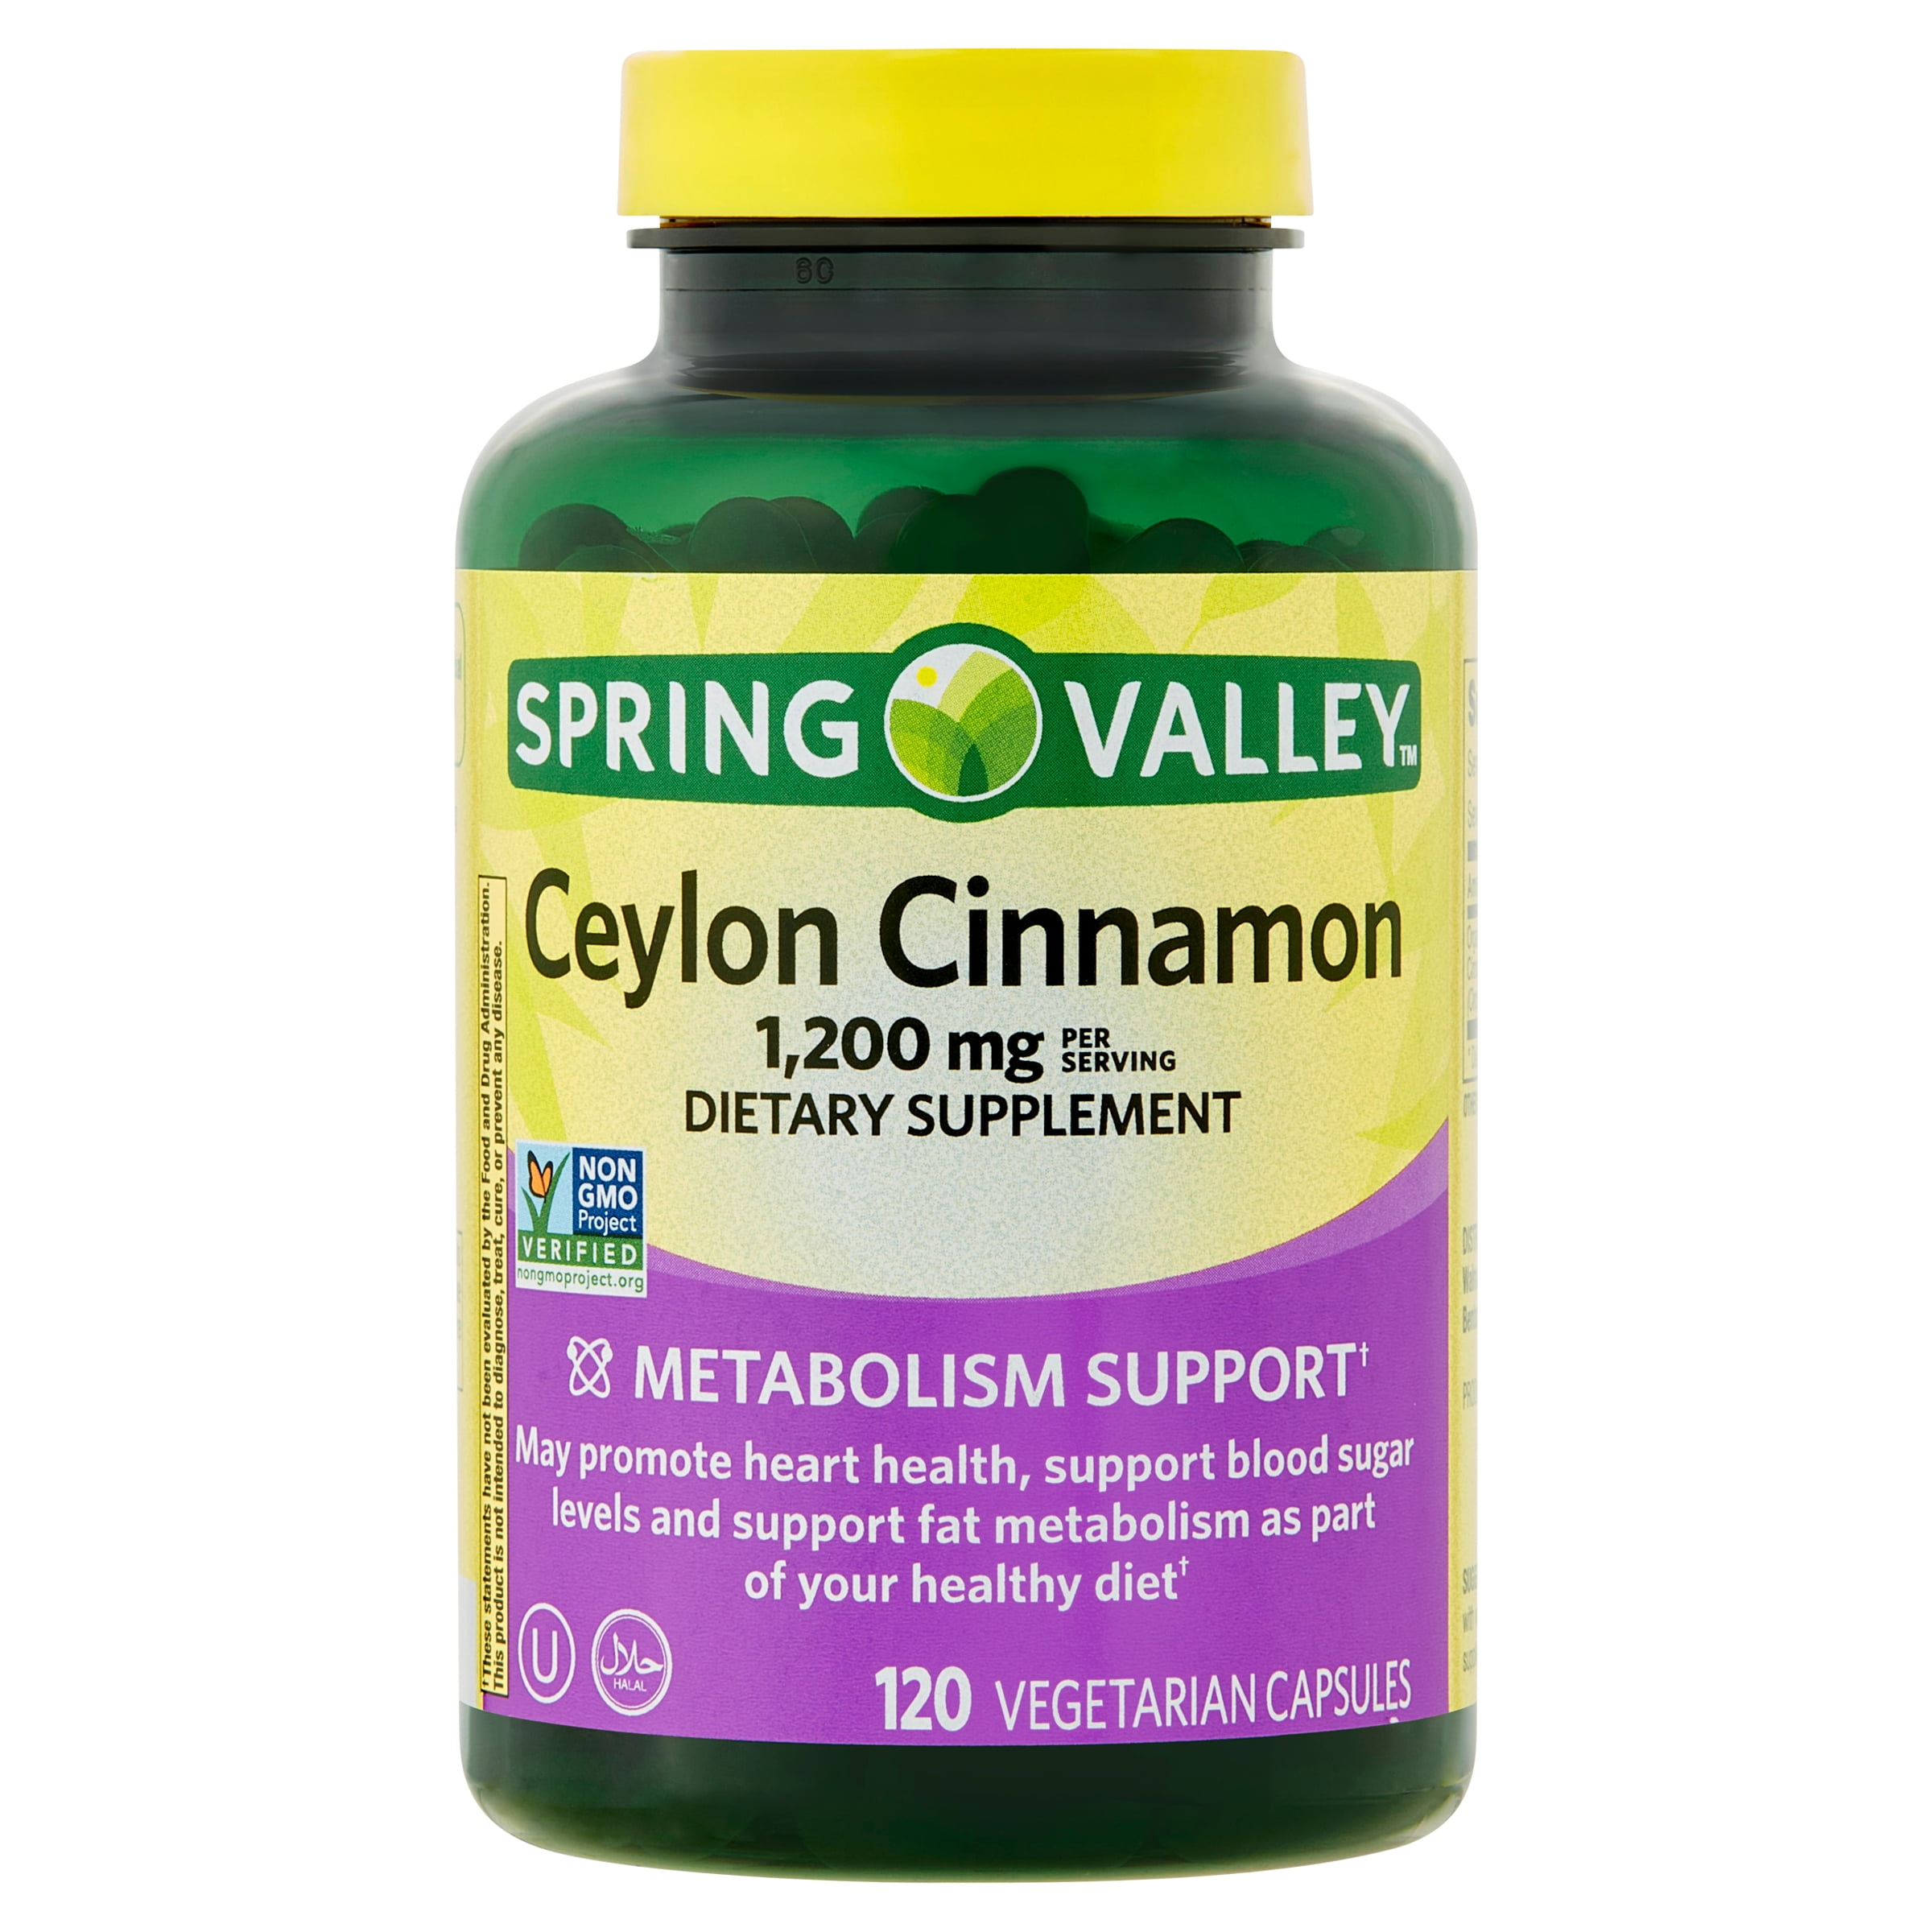 Spring Valley Ceylon Cinnamon Metabolism Support Dietary Supplement  Vegetarian Capsules, 1,200 mg, 120 Count 